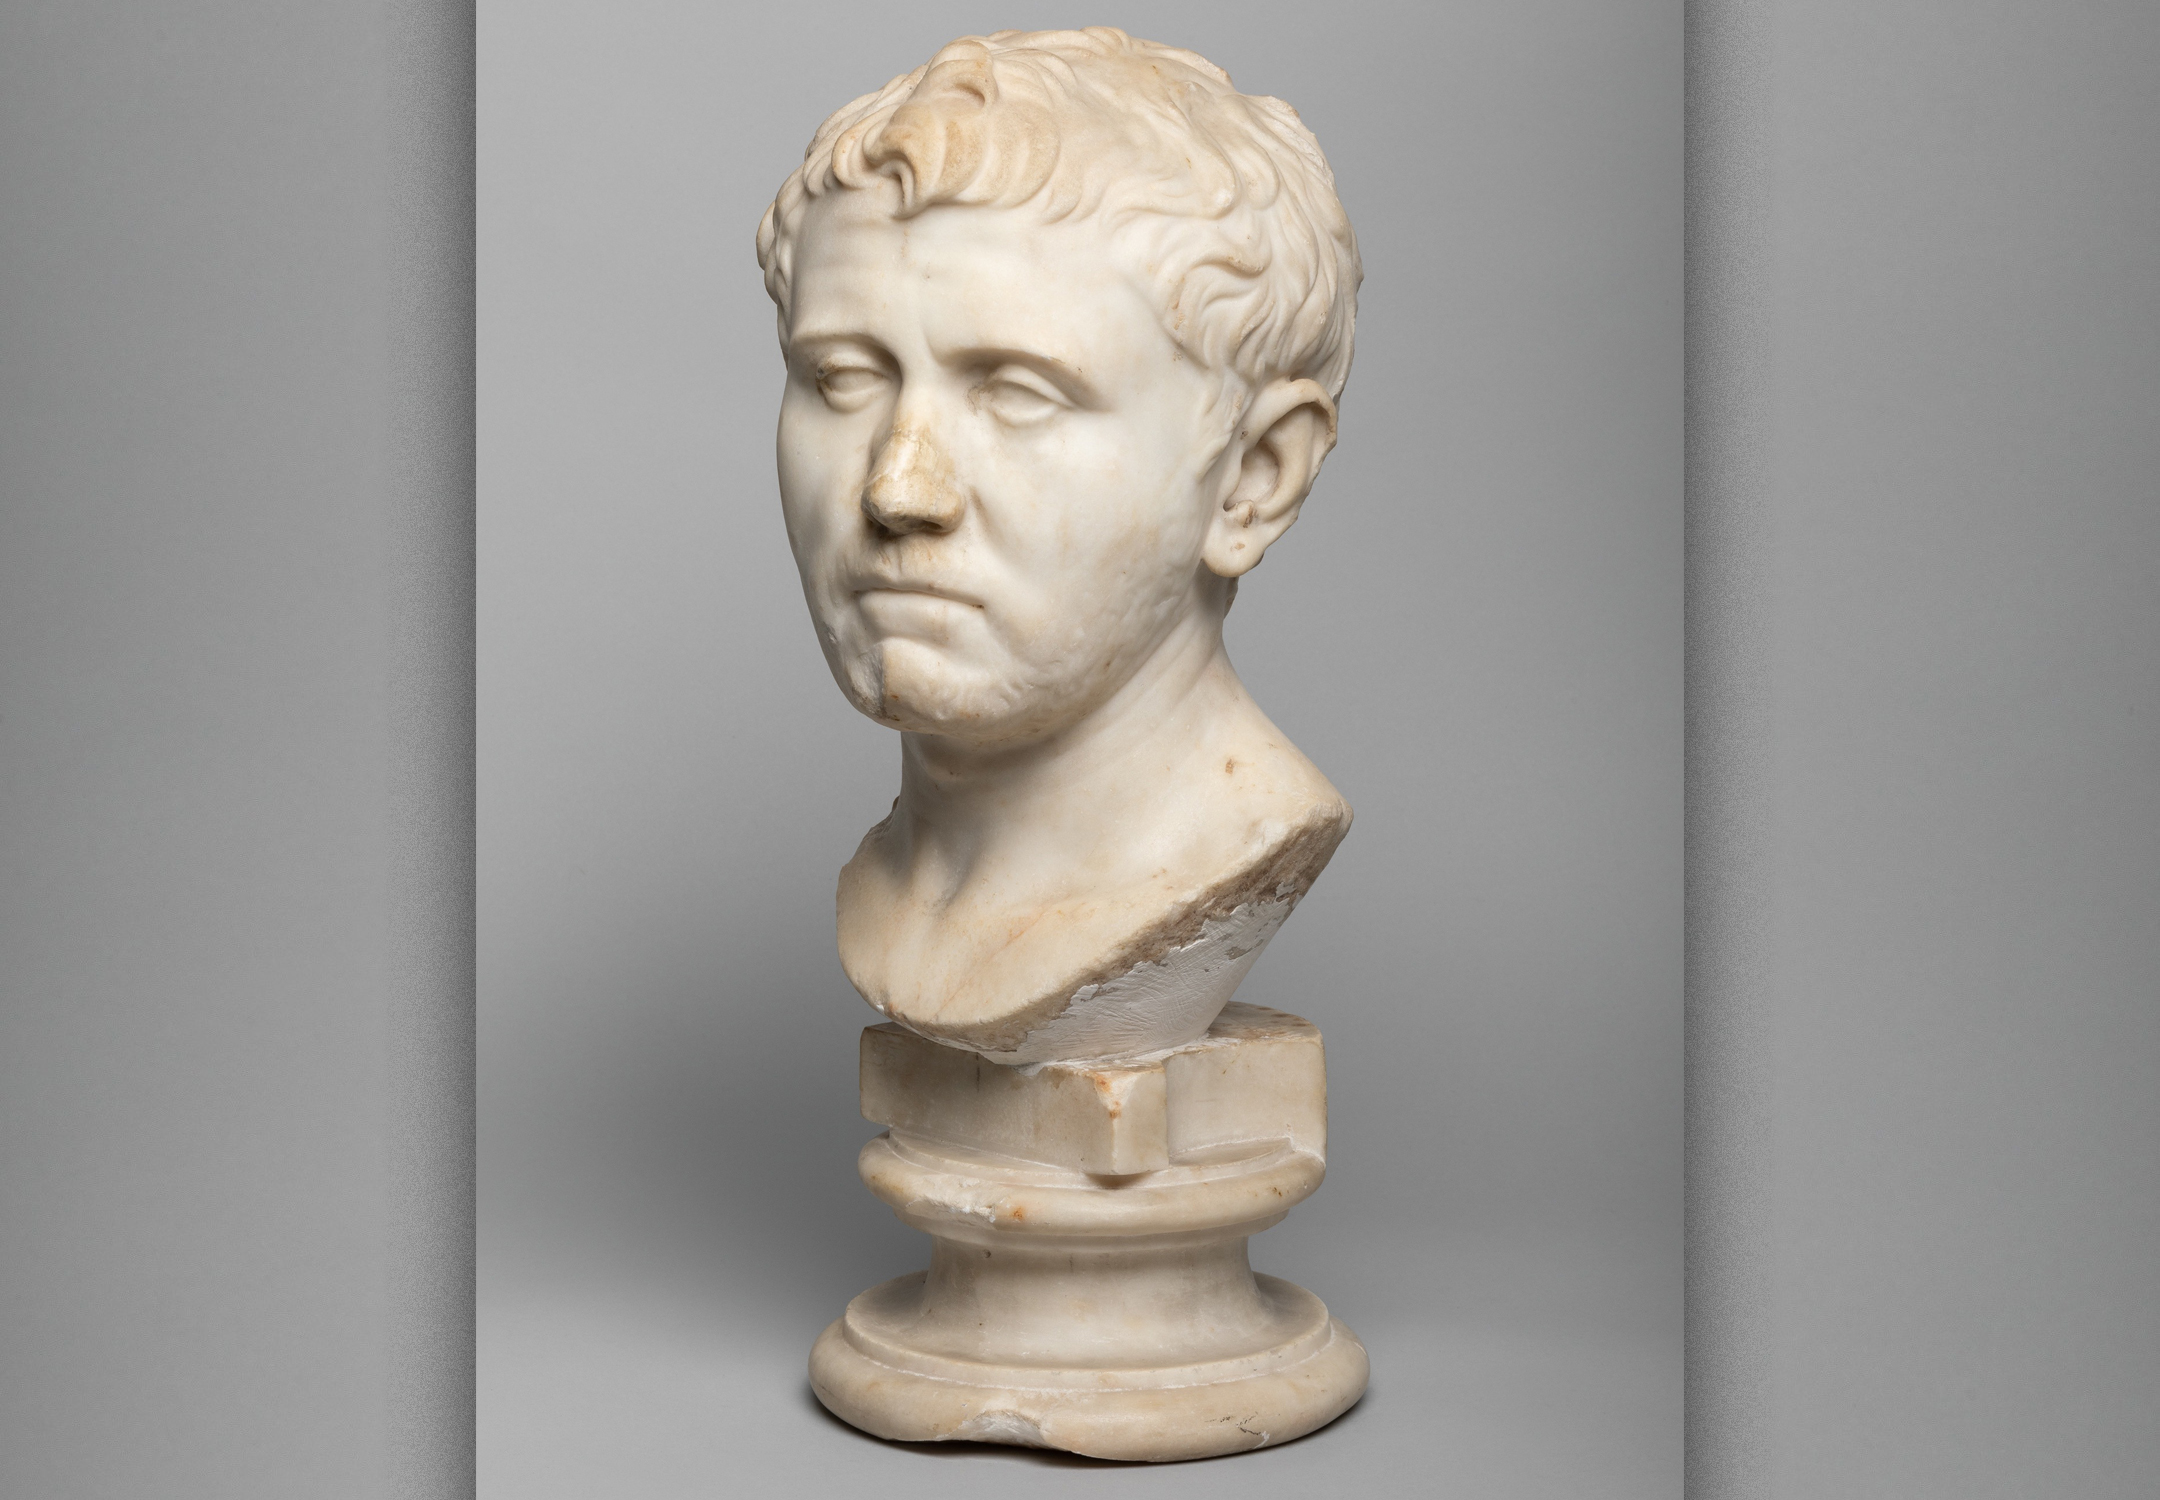 Photo of a marble bust of a man against a gray background